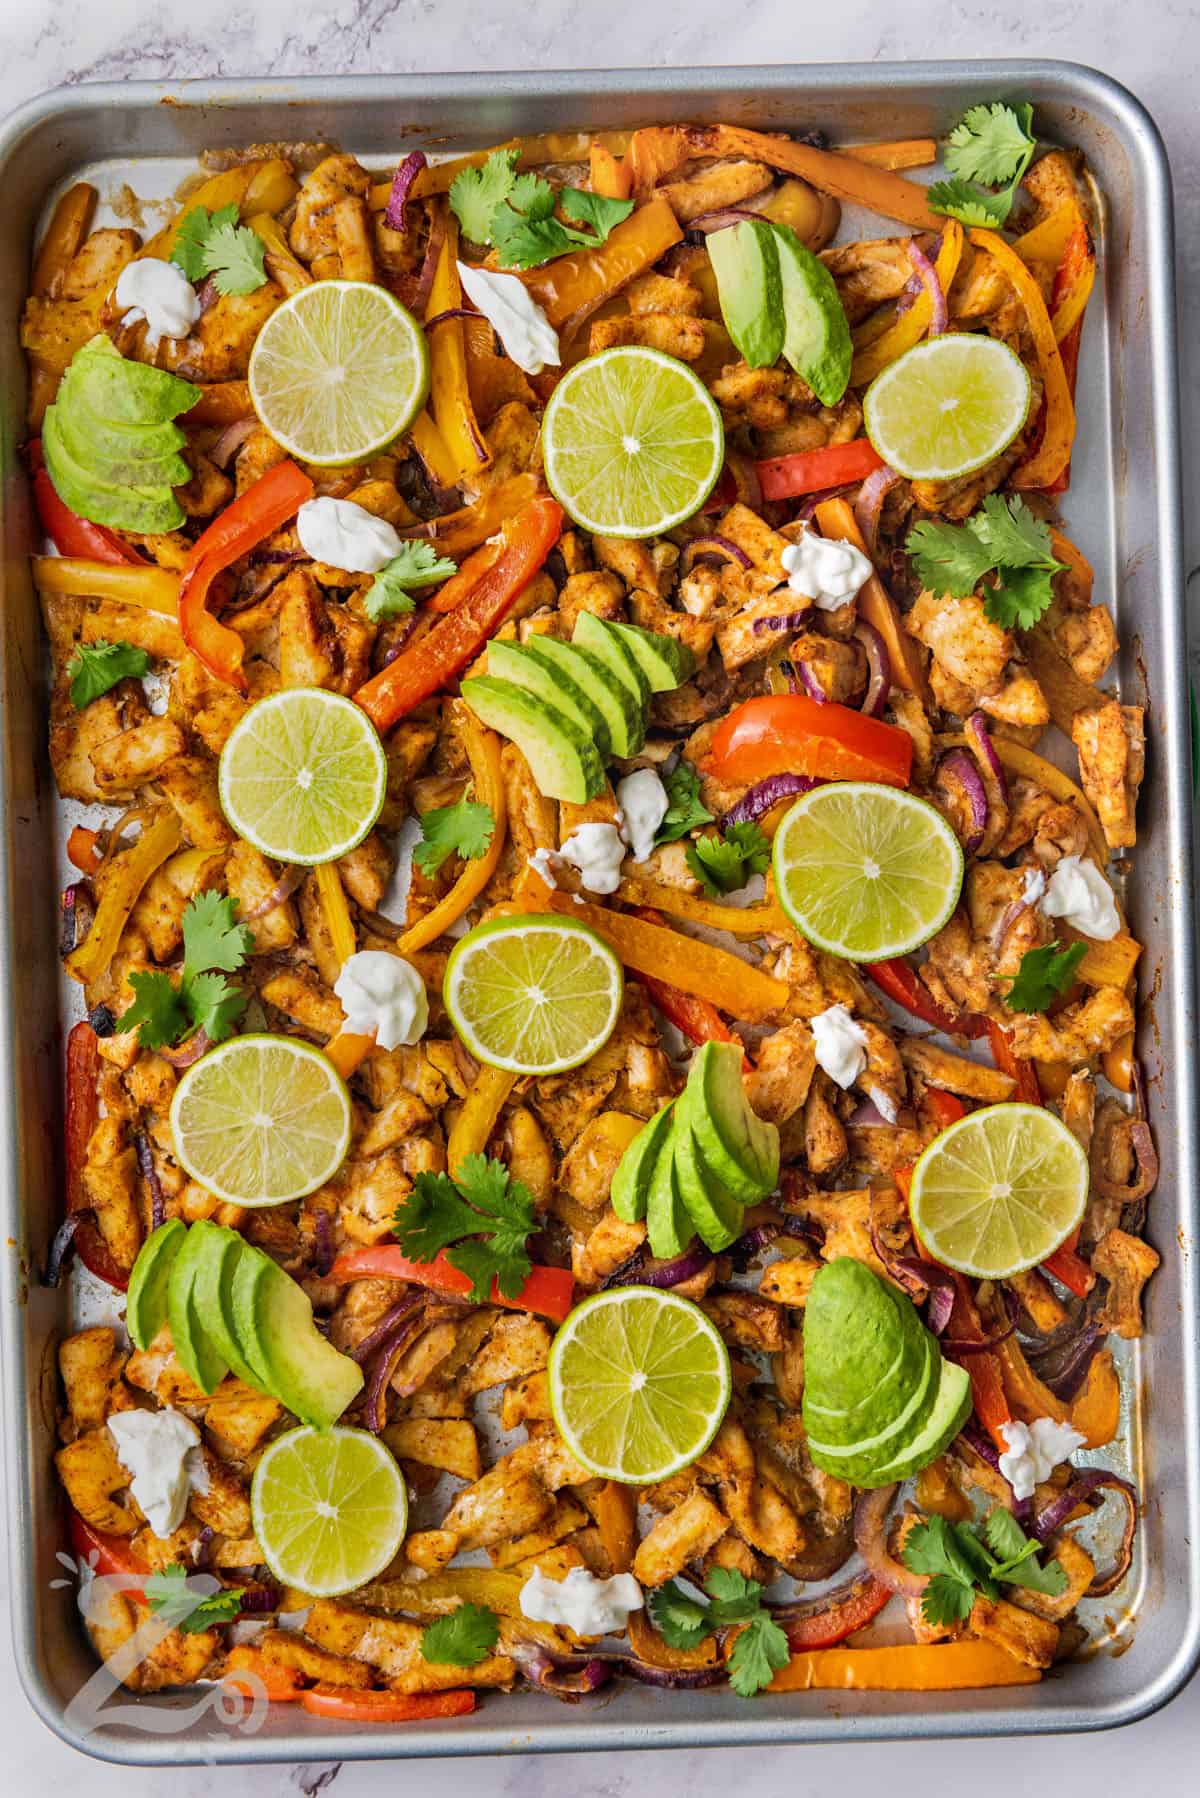 chicken fajita filling on a sheet pan topped with limes, avocados, and cilantro